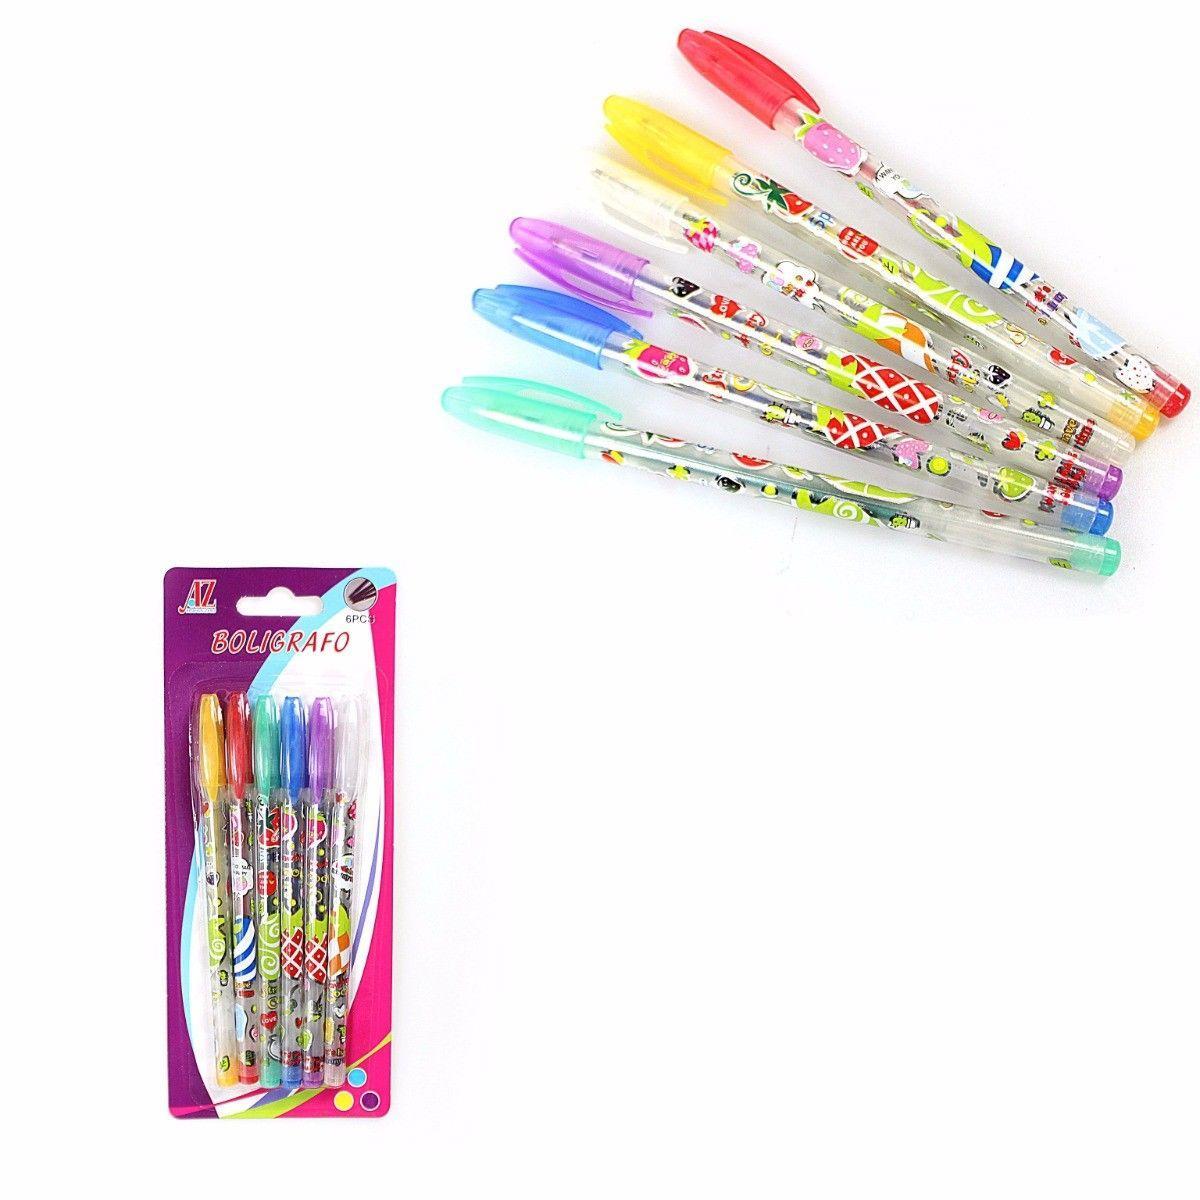 Children's Gel Pens Stationary Pack of 6 Colours 3107 (Large Letter Rate)